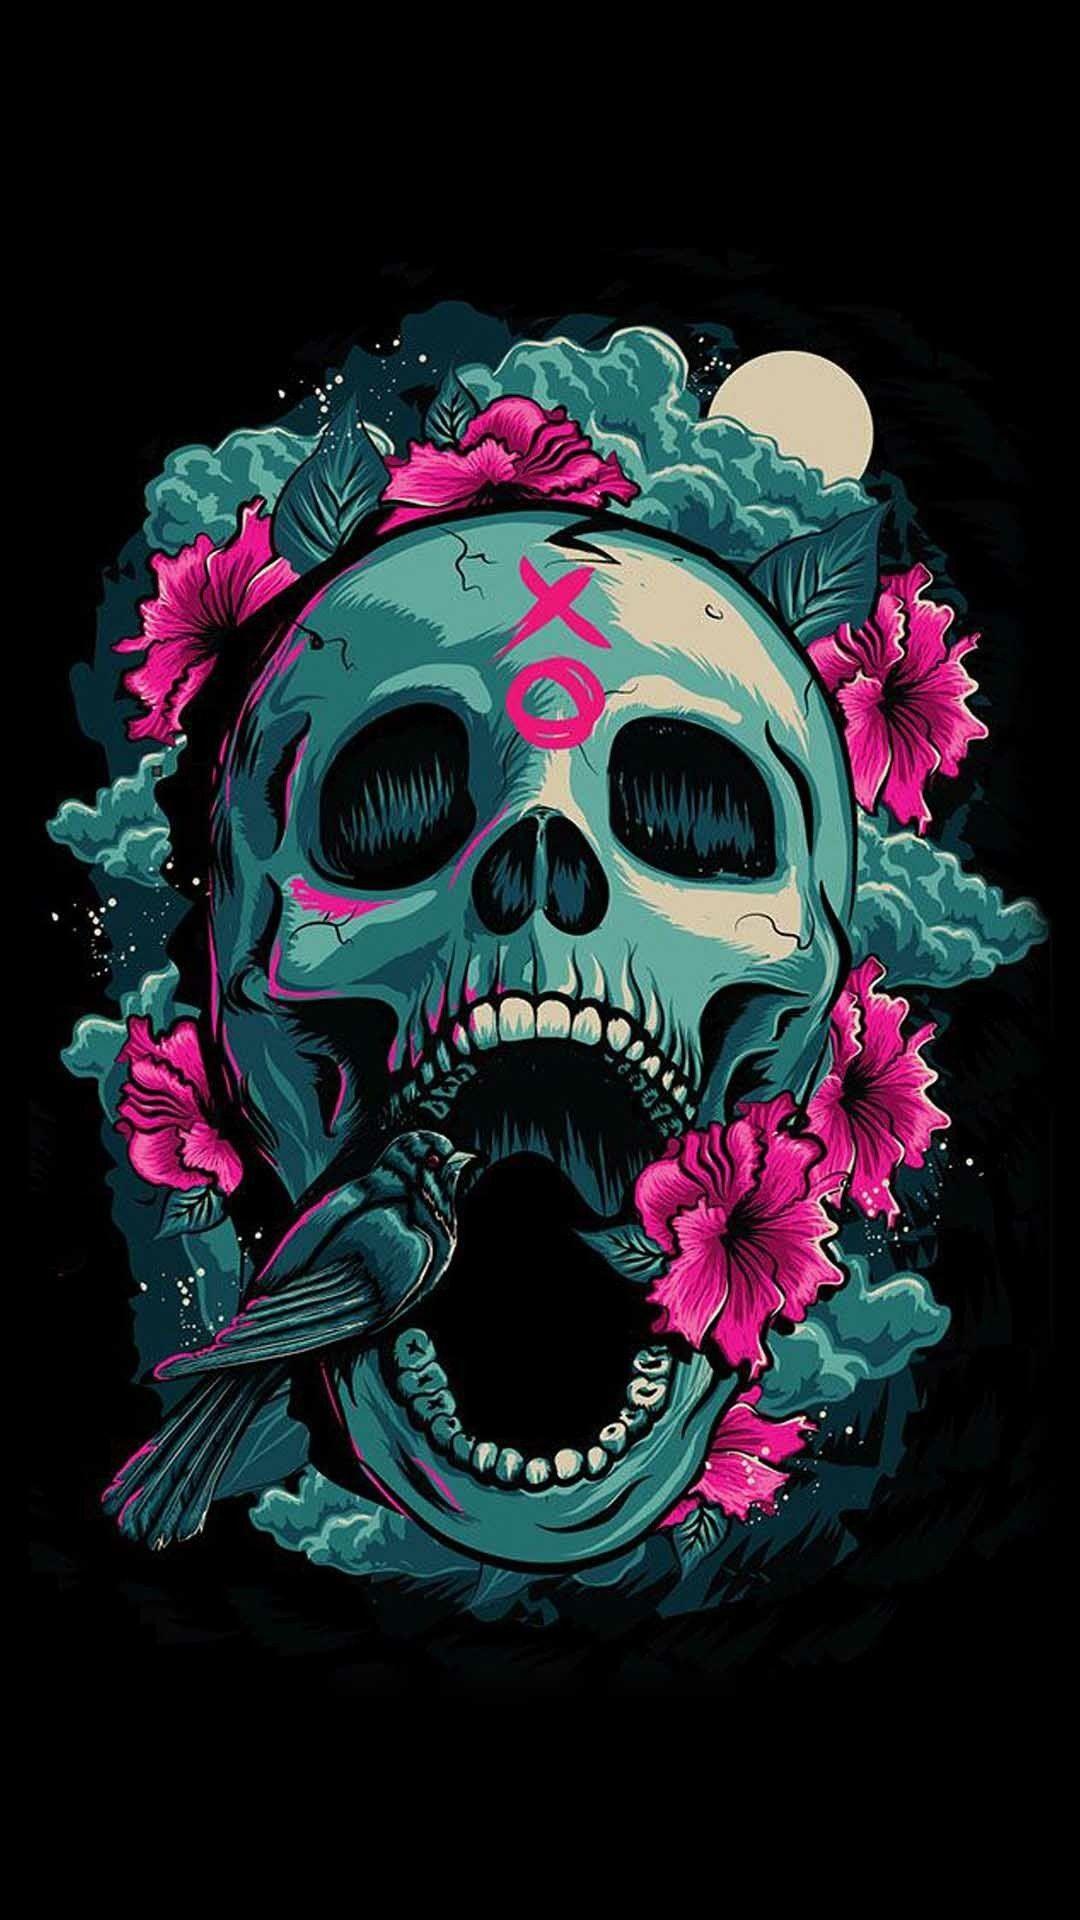 Fire Skull IPhone Wallpaper HD  IPhone Wallpapers  iPhone Wallpapers